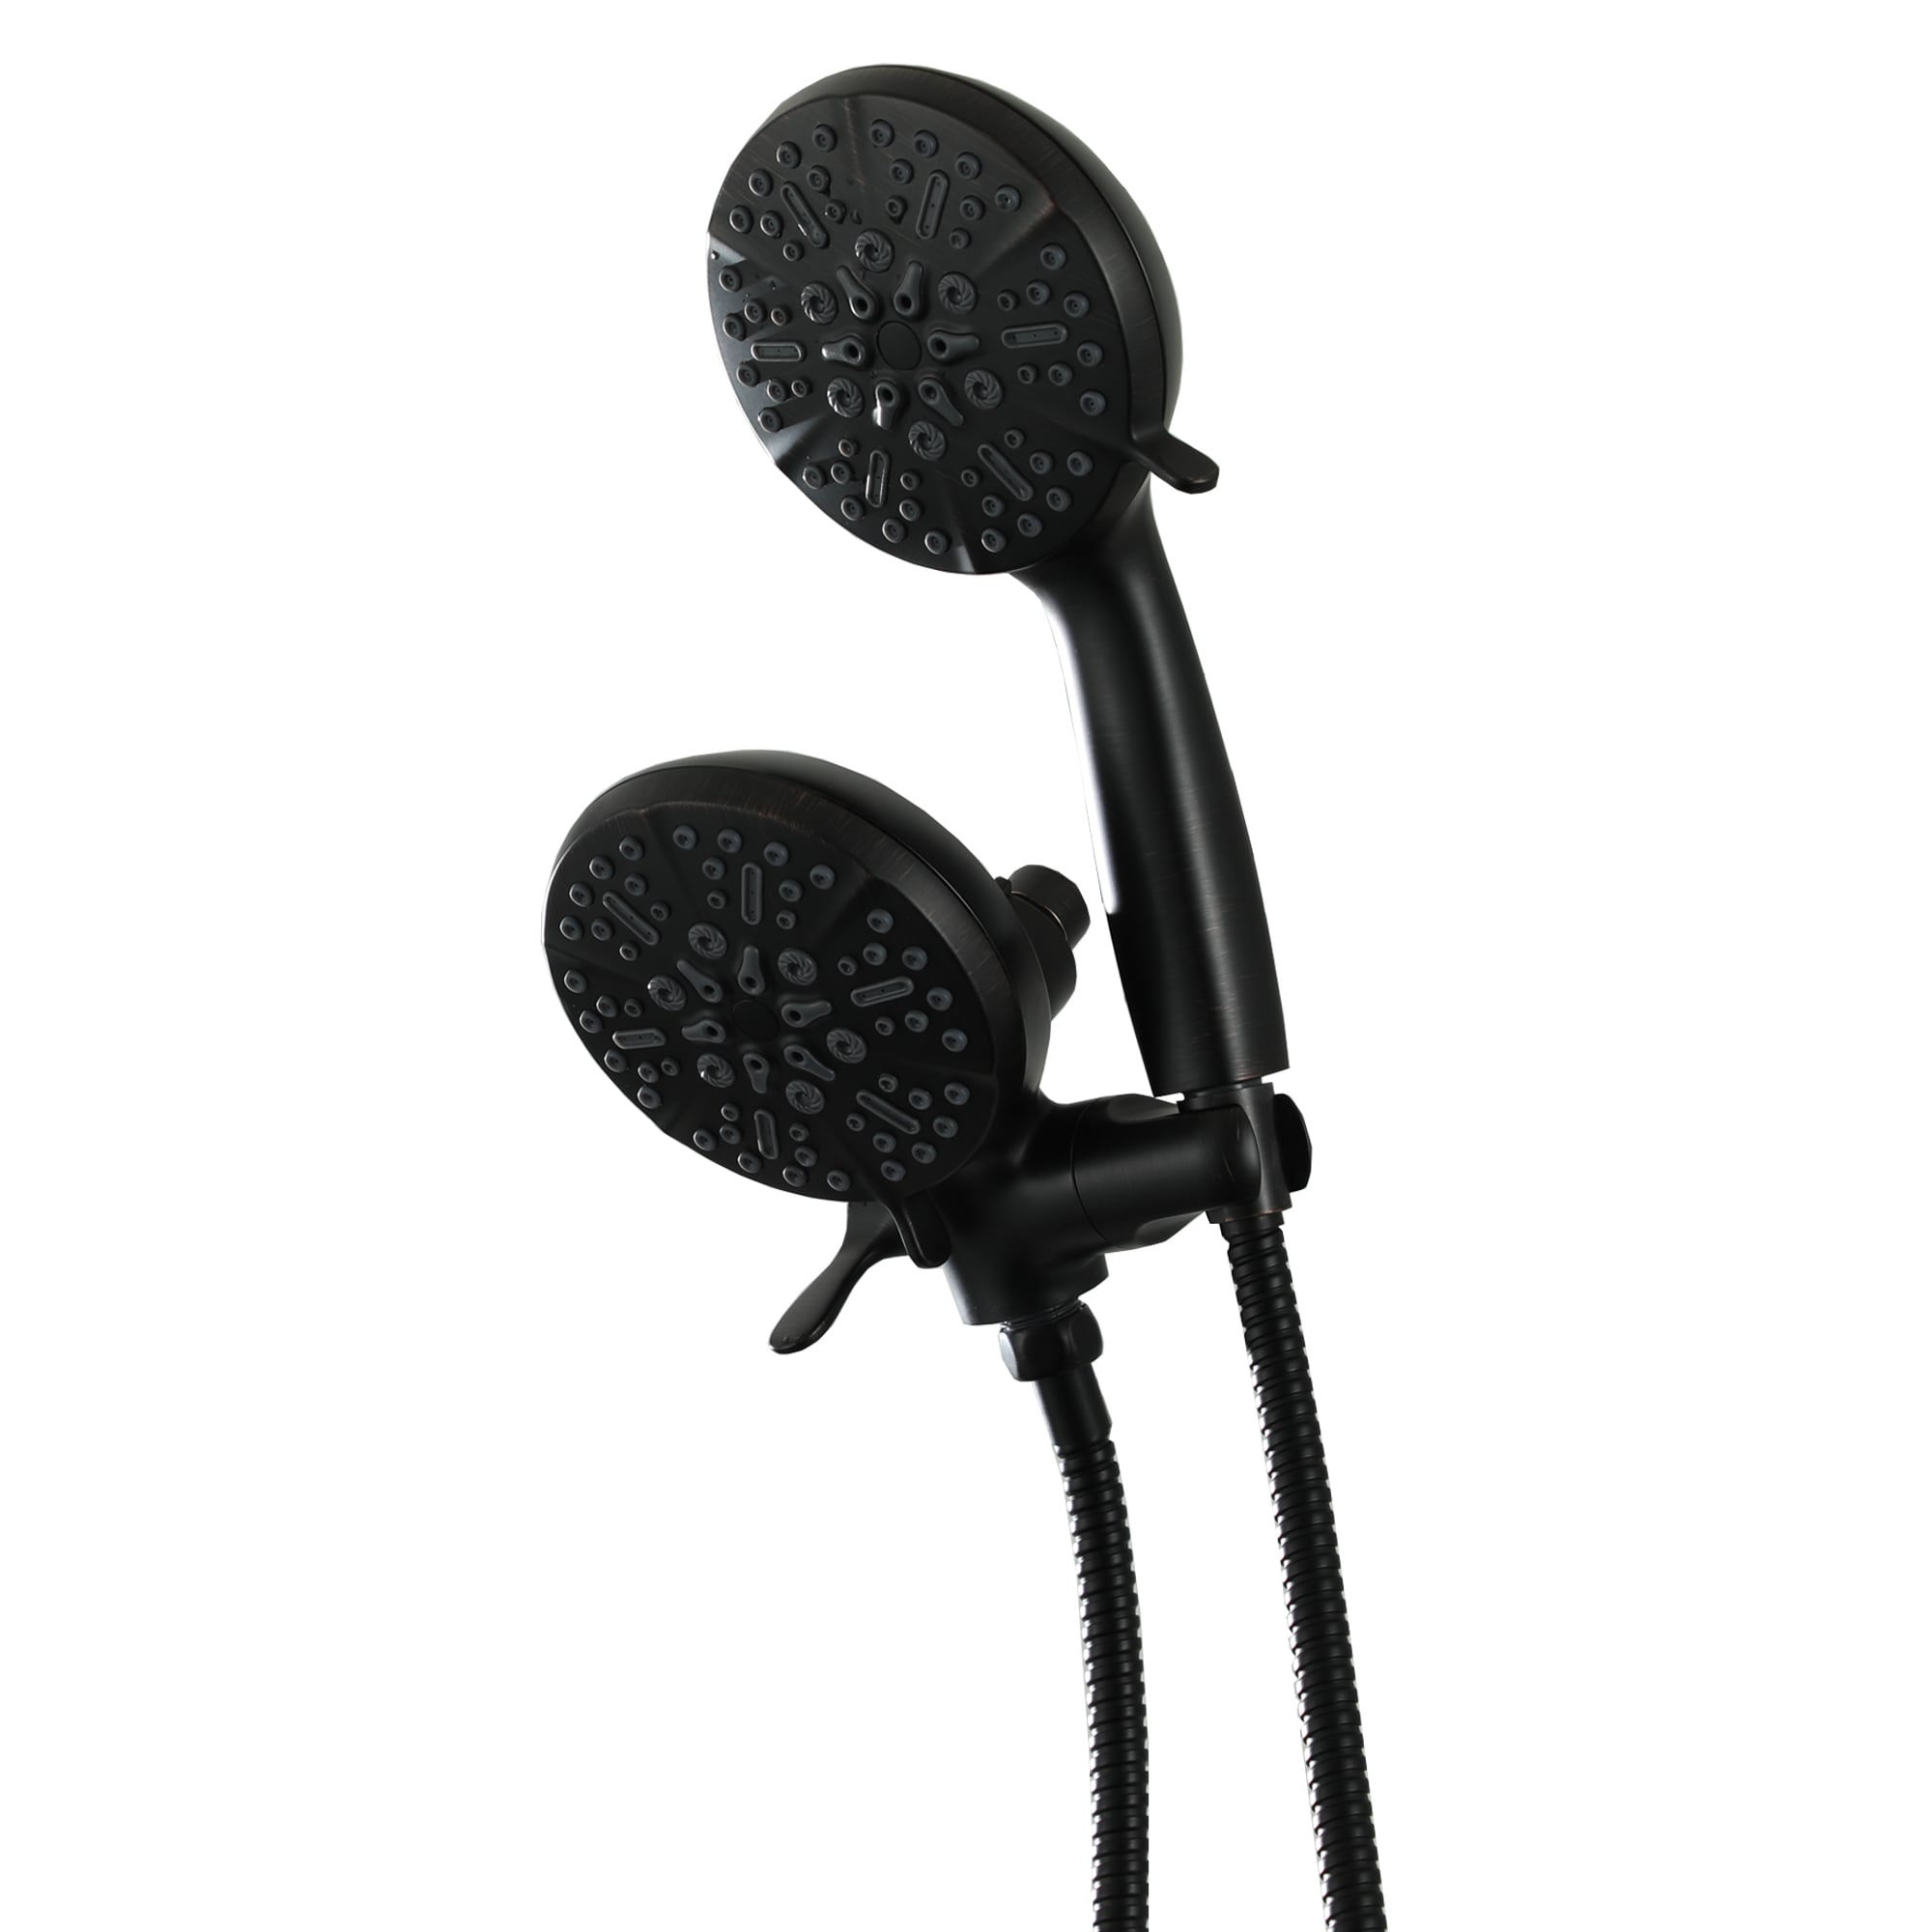 CASAINC Dual Shower Heads and Handheld Shower Head Oil Rubbed Bronze 5-Spray Rain Shower Head Dual Shower Head 2.5-GPM (9.5-LPM) in the Shower Heads department at Lowes.com